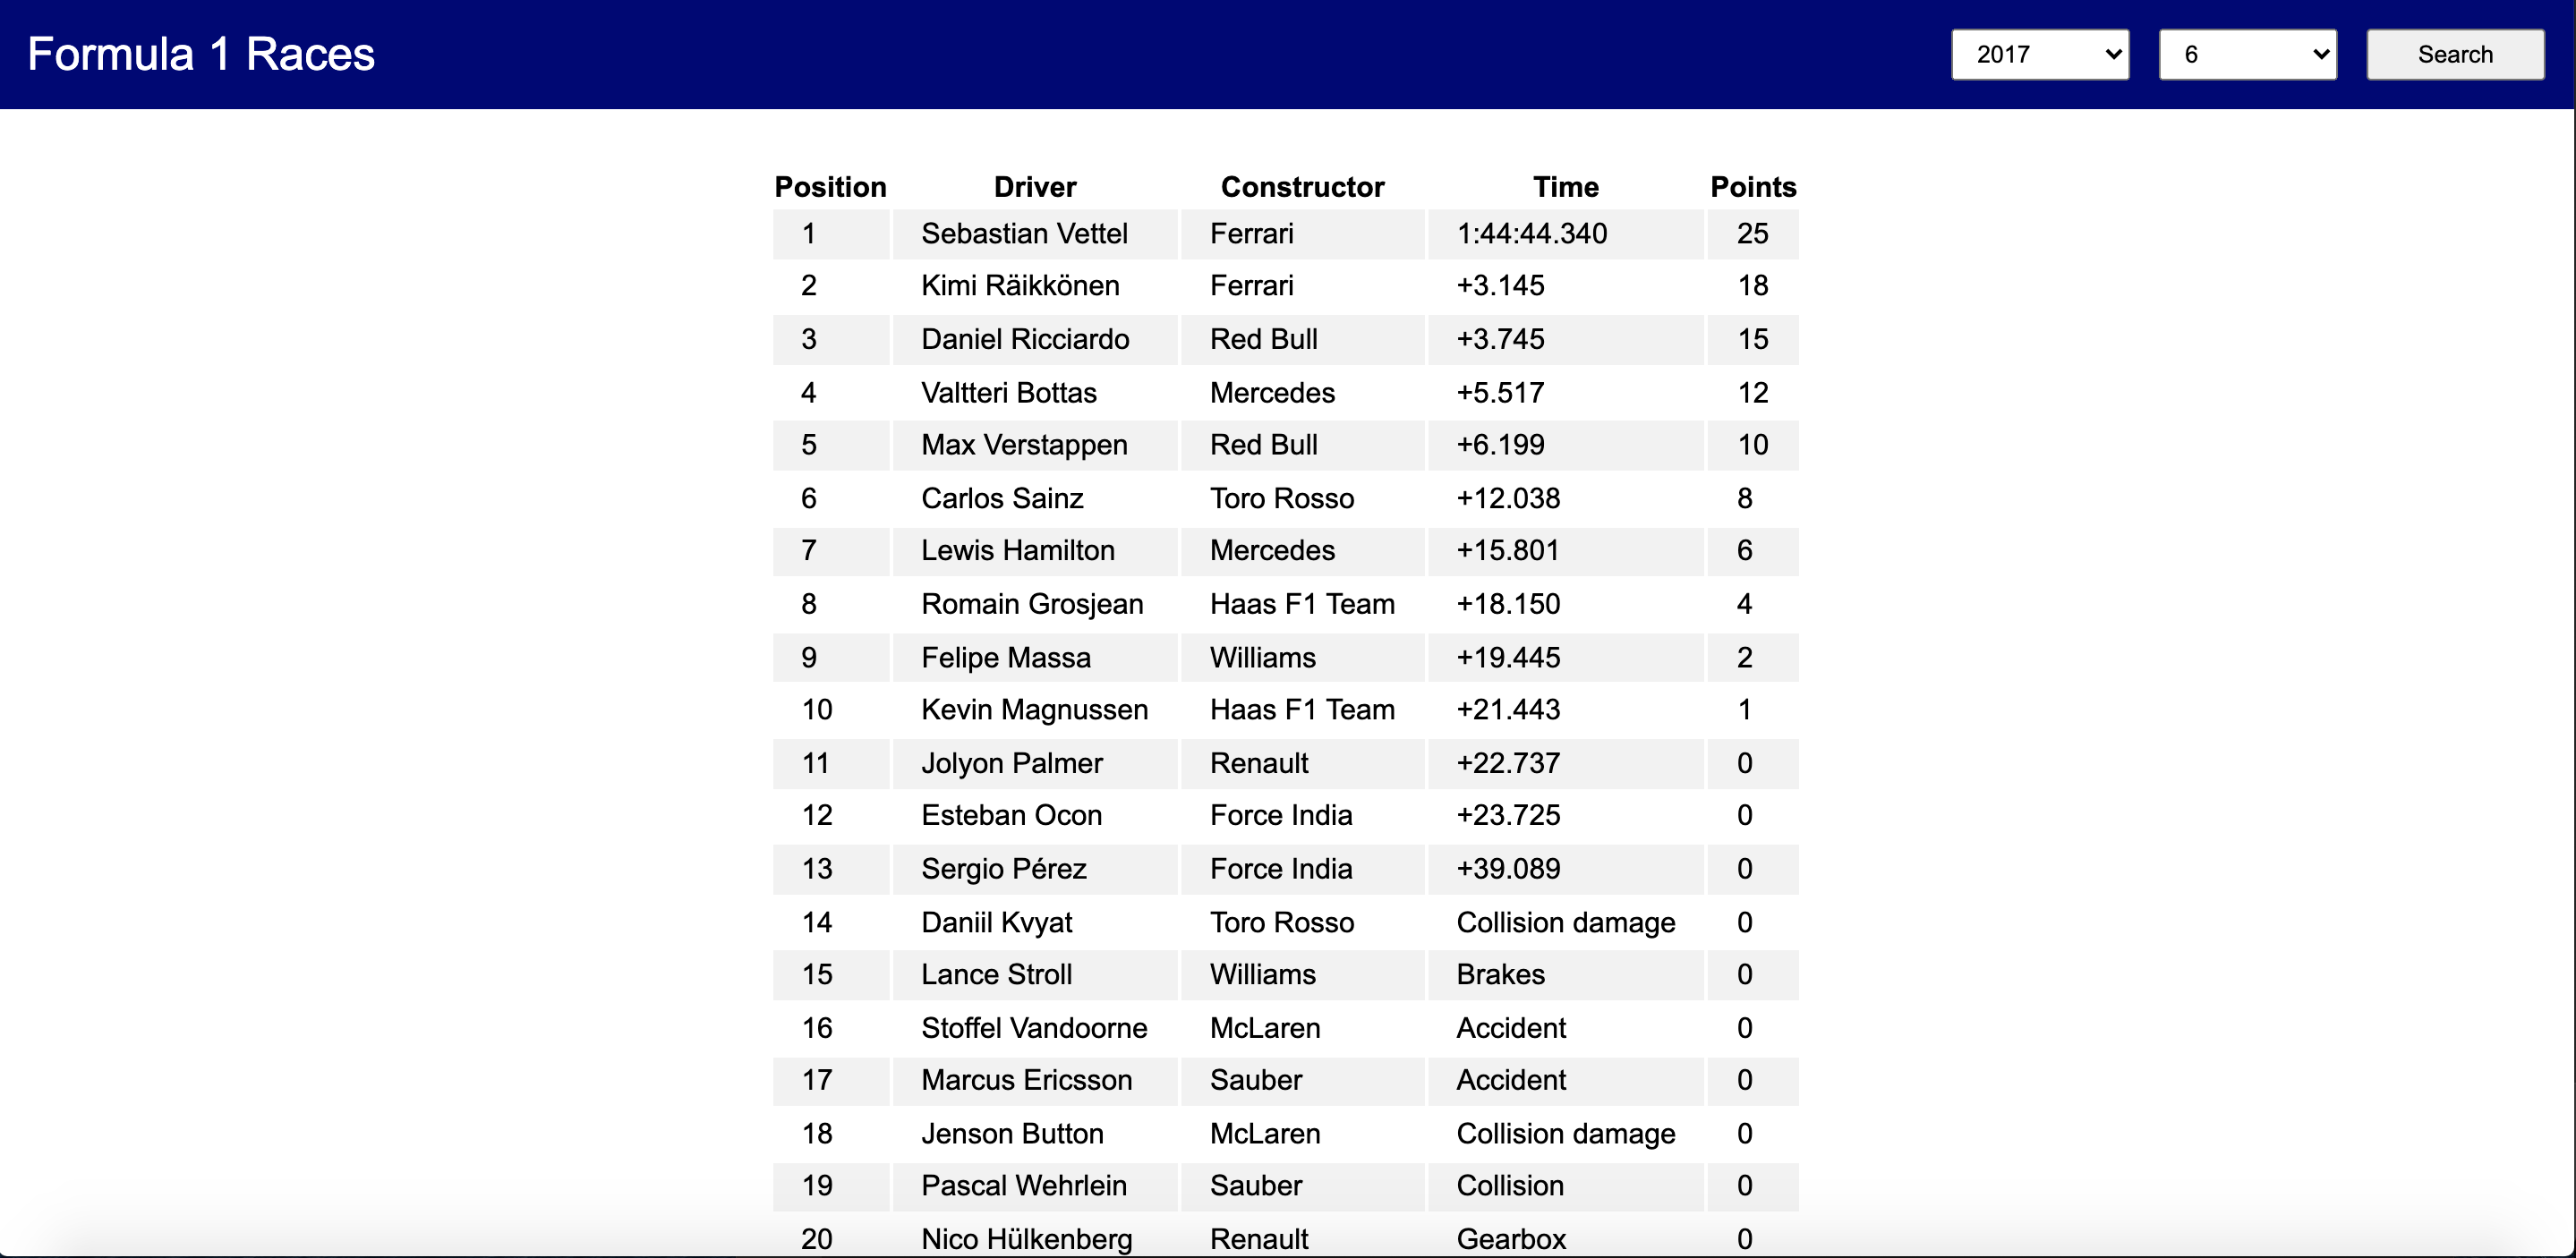 Formula 1 results viewer snippet